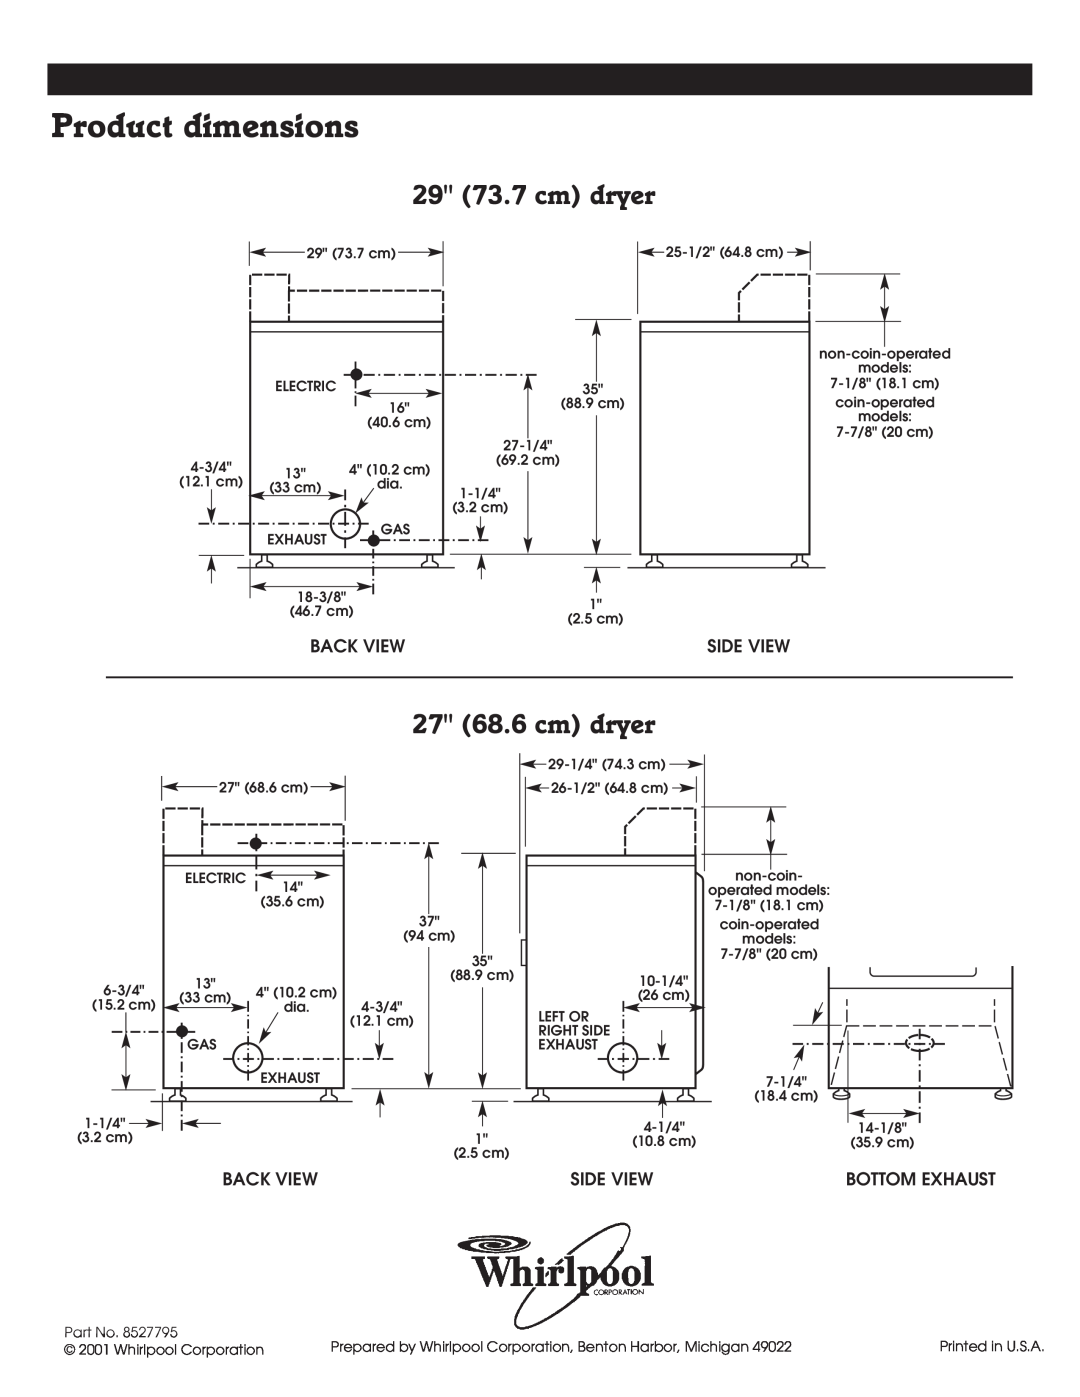 Whirlpool 8527795 installation instructions Product dimensions, 29 73.7 cm dryer, 27 68.6 cm dryer, Back View, Side View 